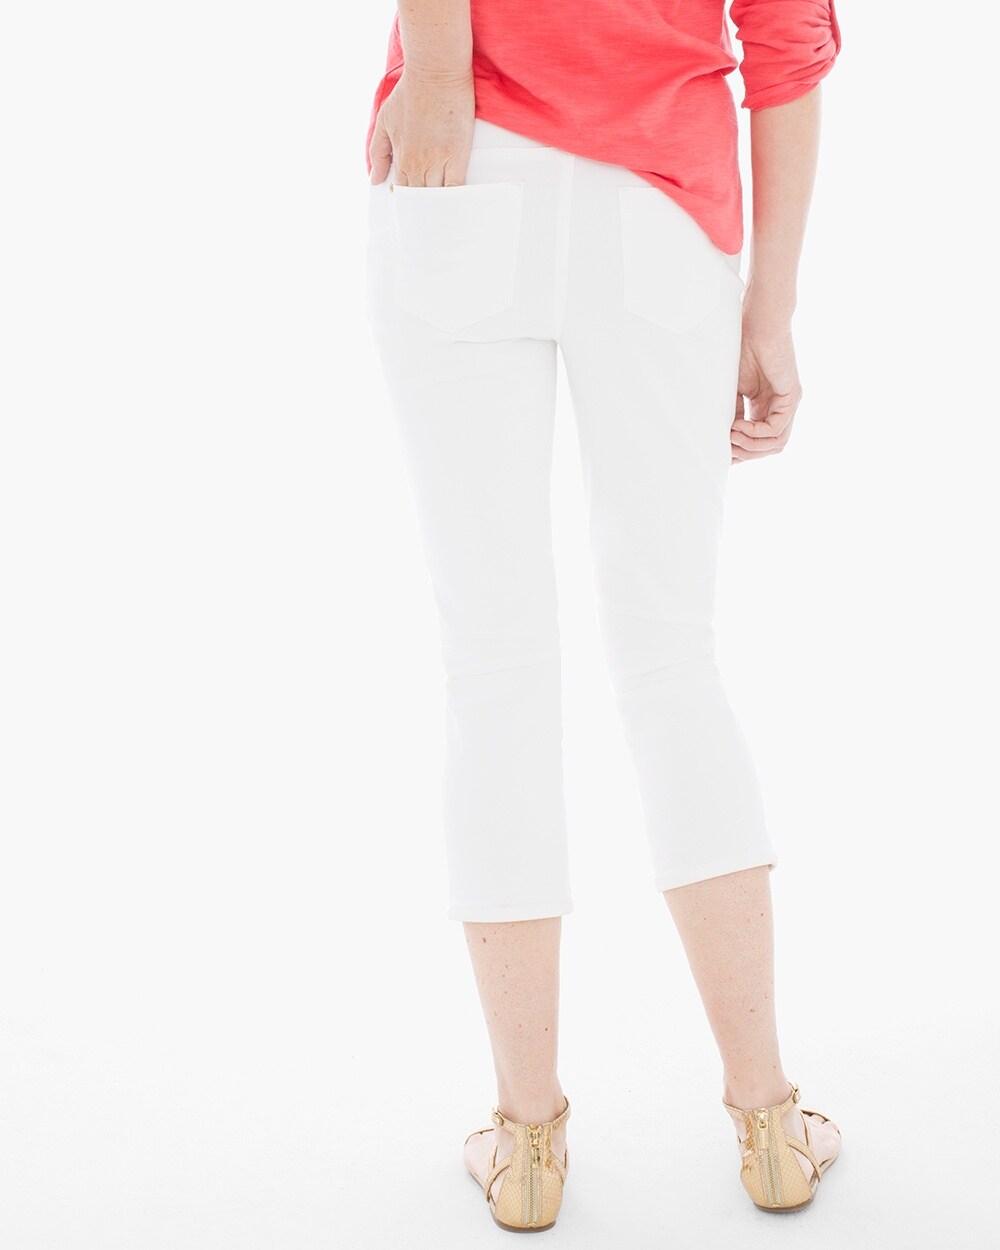 So Lifting Crop Jeans - Chico's